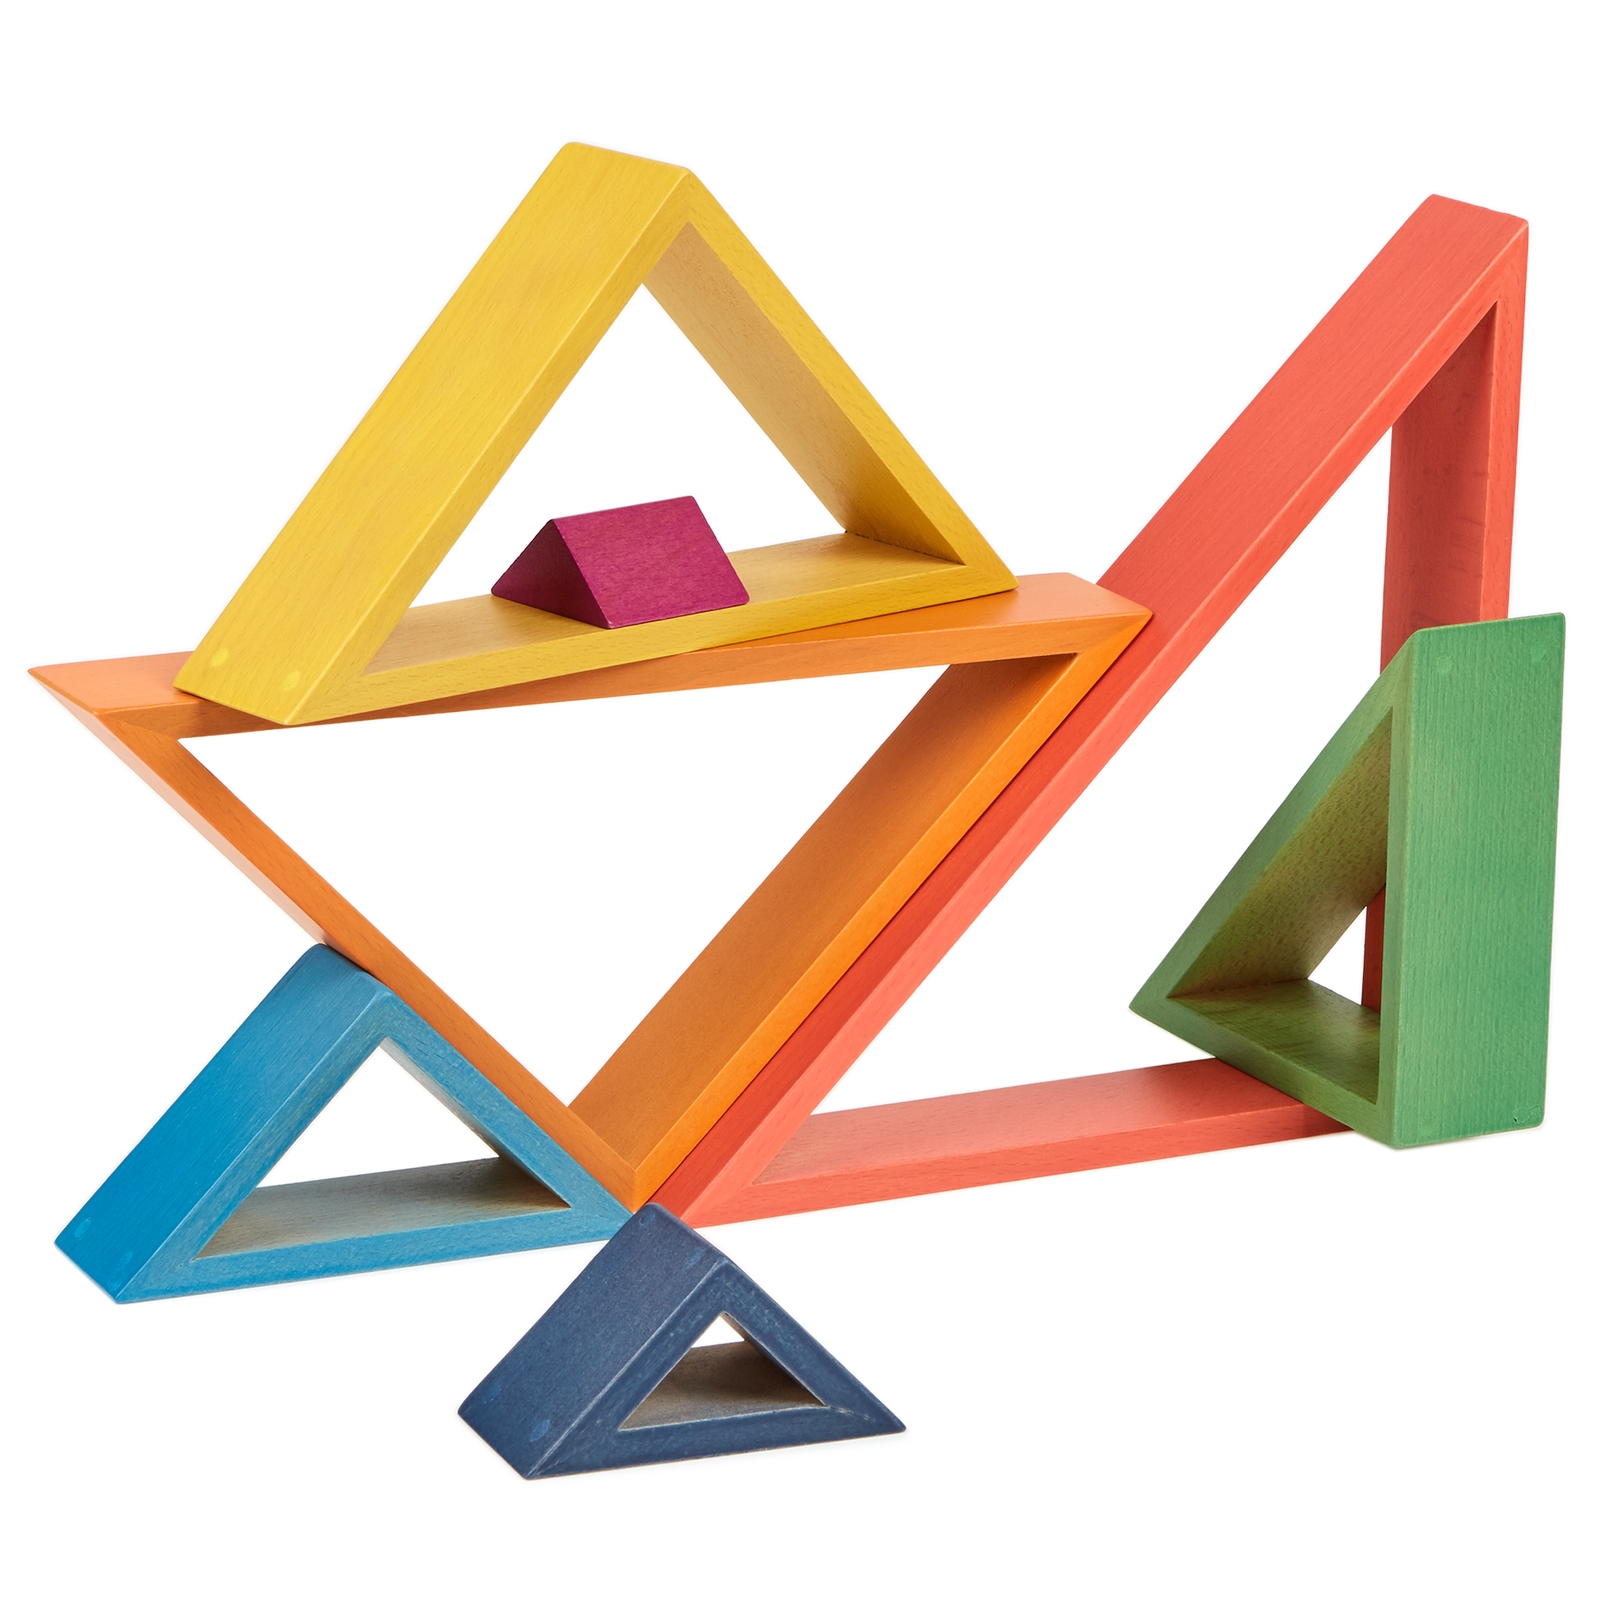 TickiT Rainbow Architect Triangles - Assorted - Pack of 7